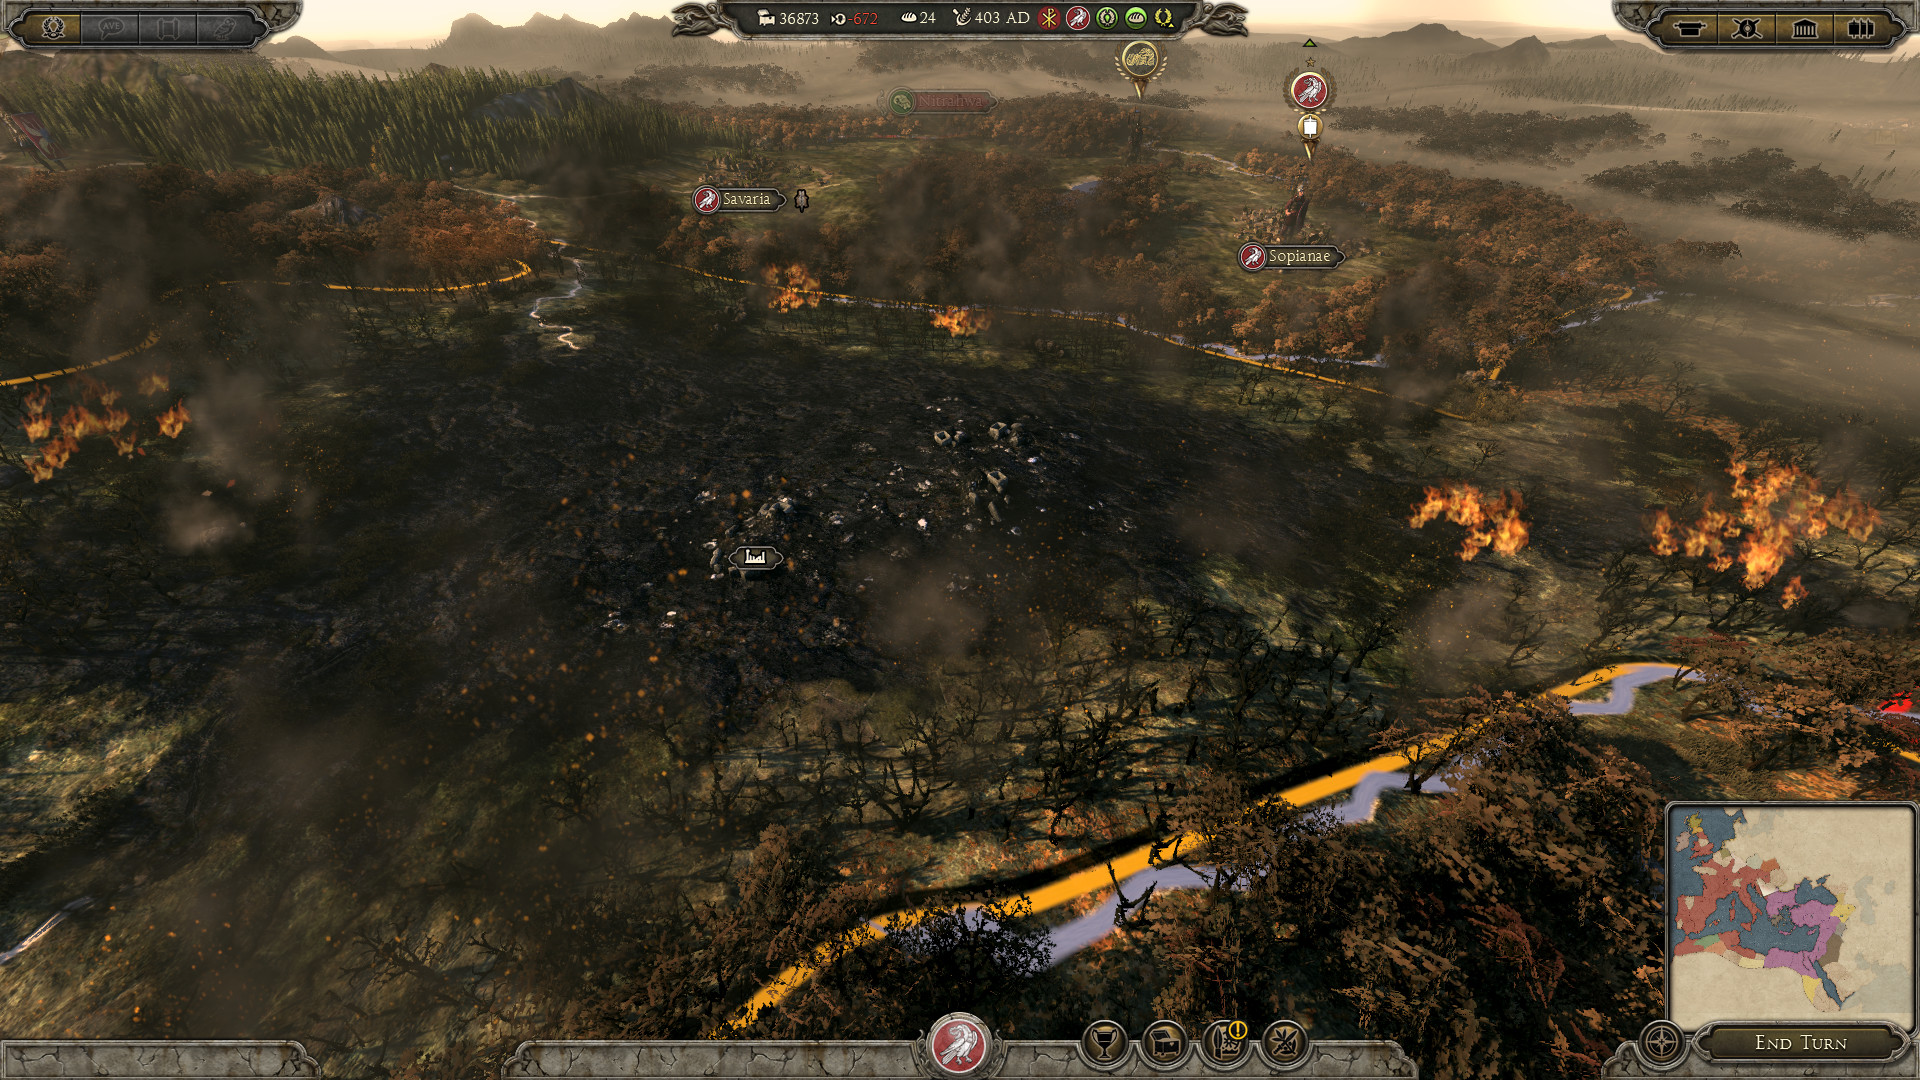 1920x1080 Hands-on: New Total War game takes on Attila the Hun | PCWorld